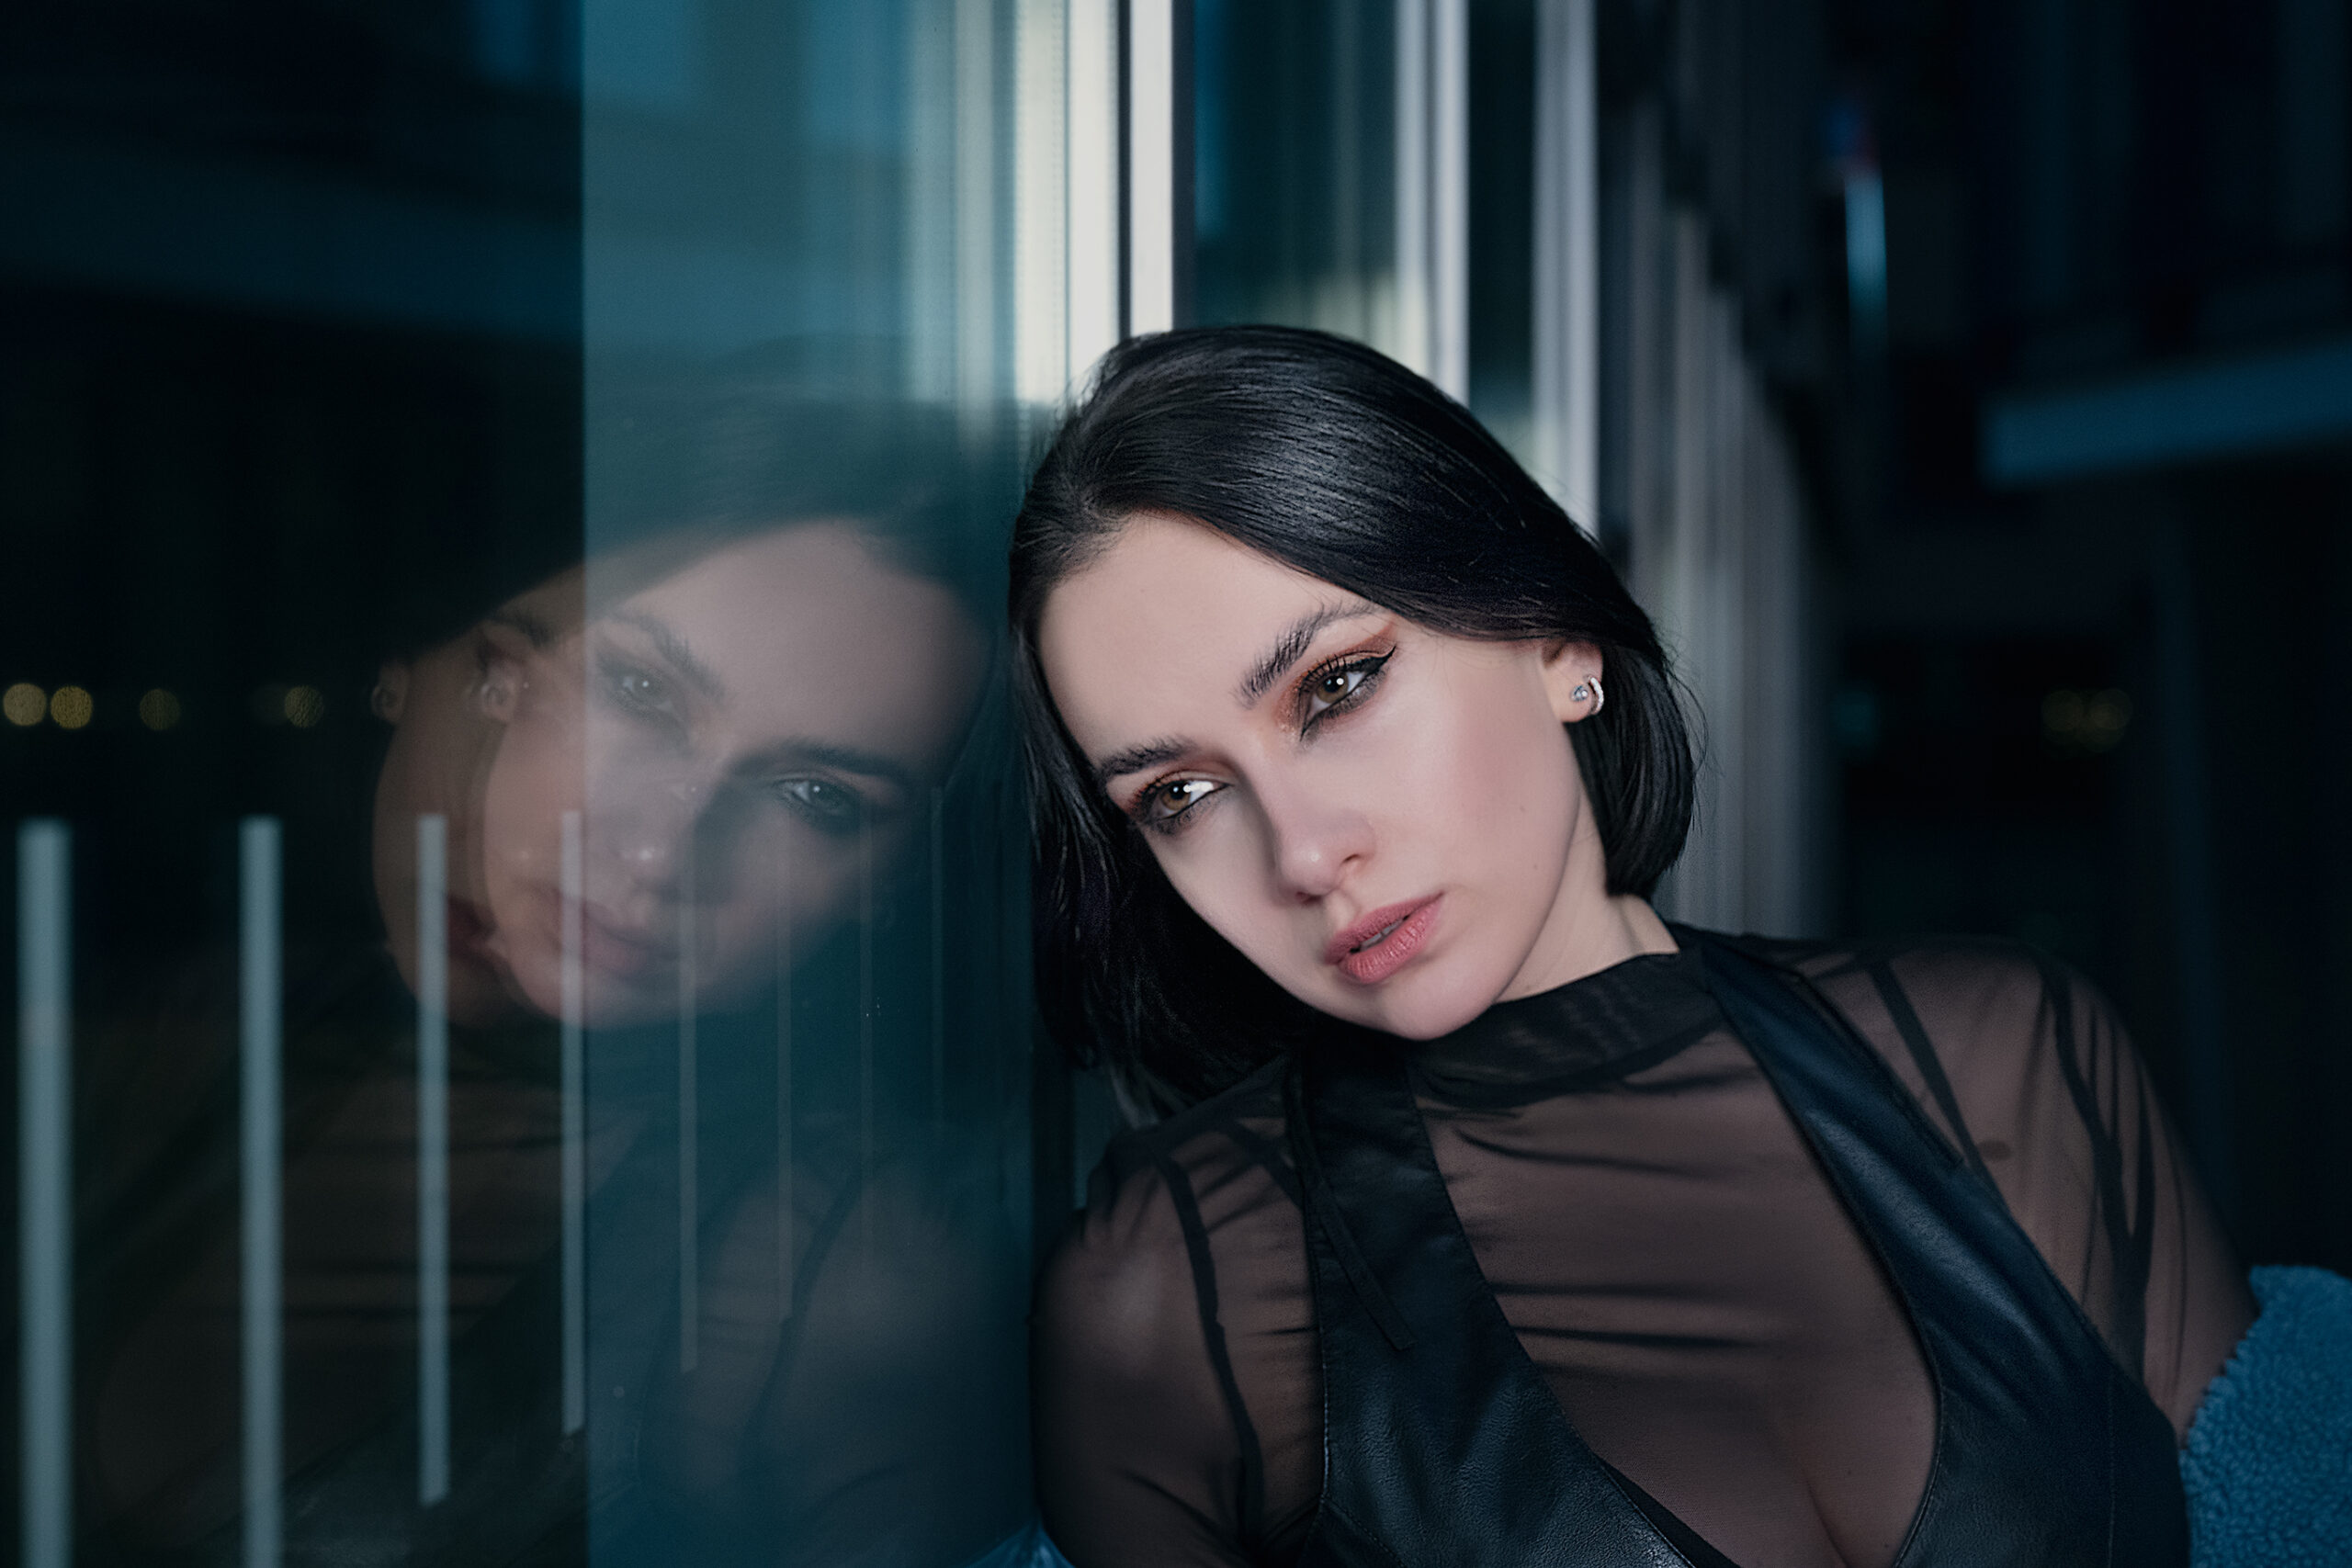 Image has a futuristic theme of dark blues, featuring a model in centre of image